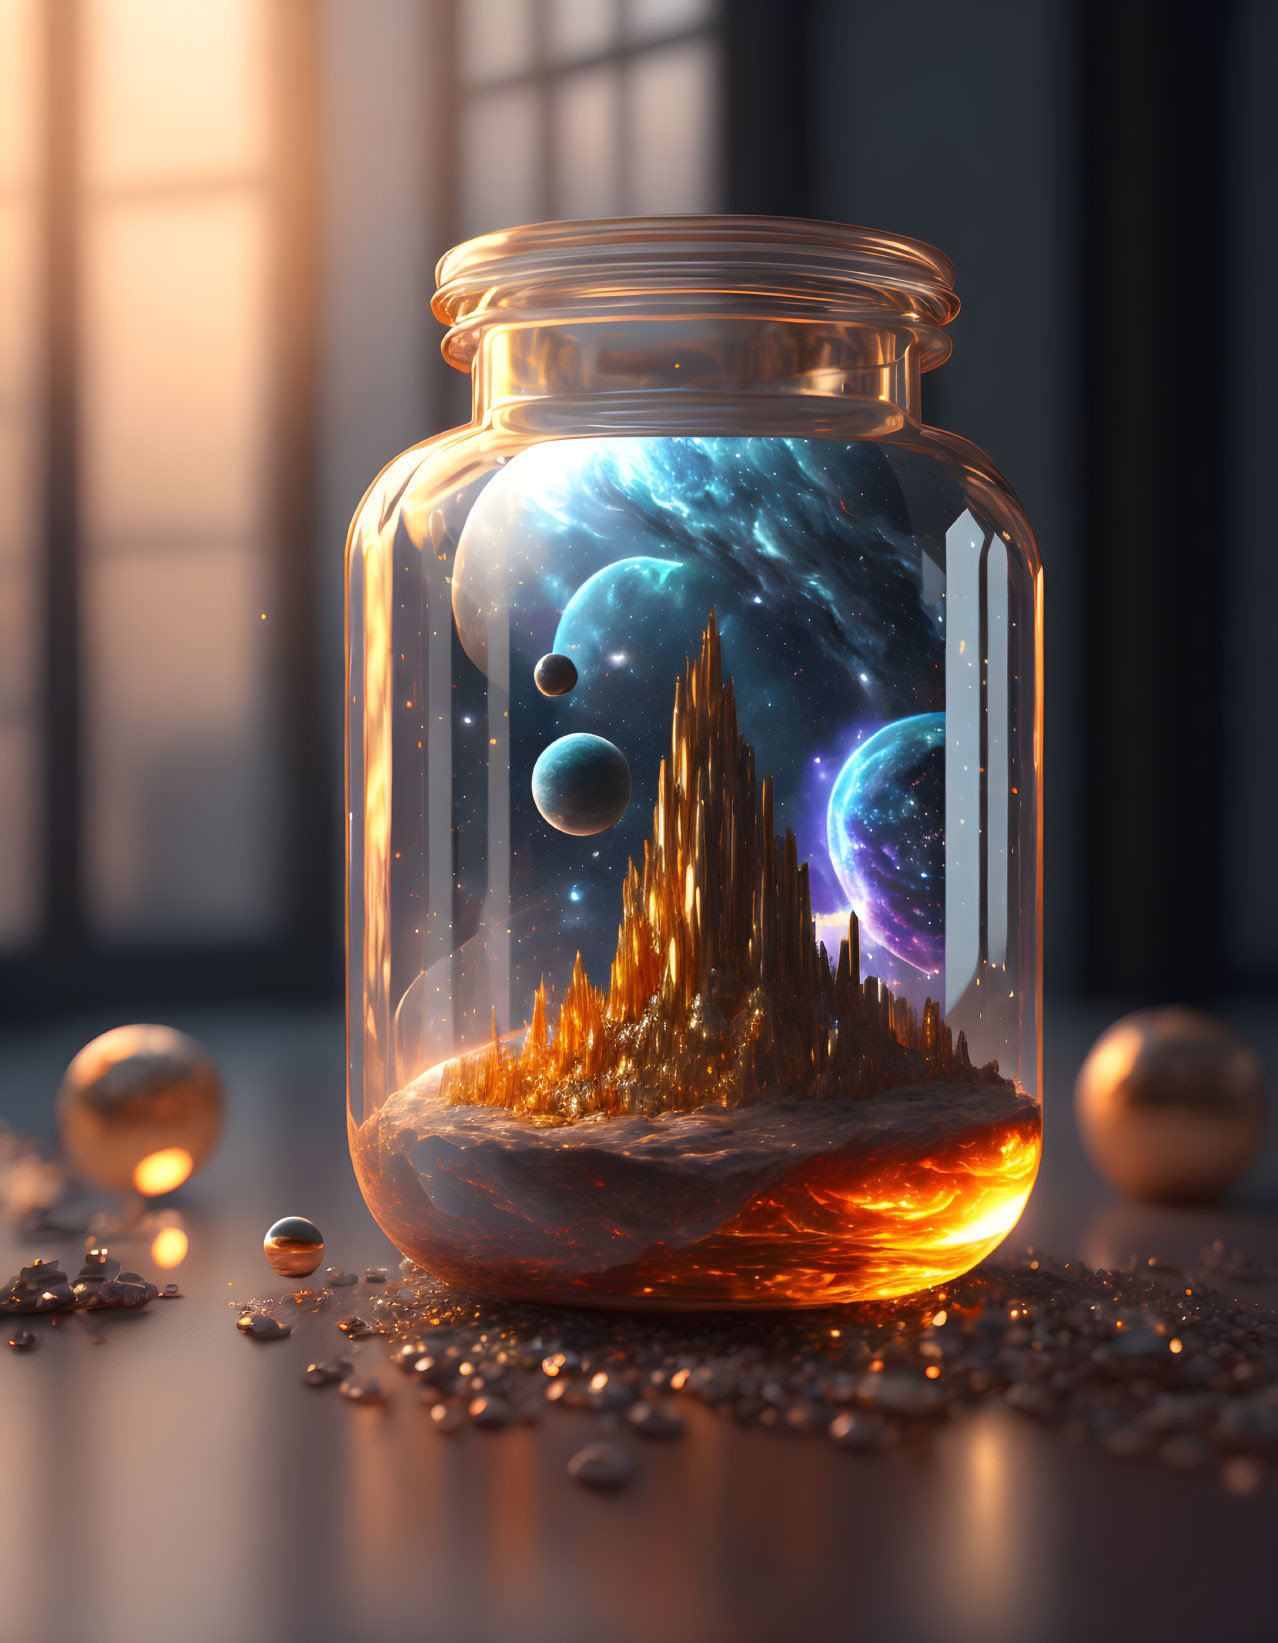 Glass jar with fantasy landscape and cosmic sky on bead-strewn surface